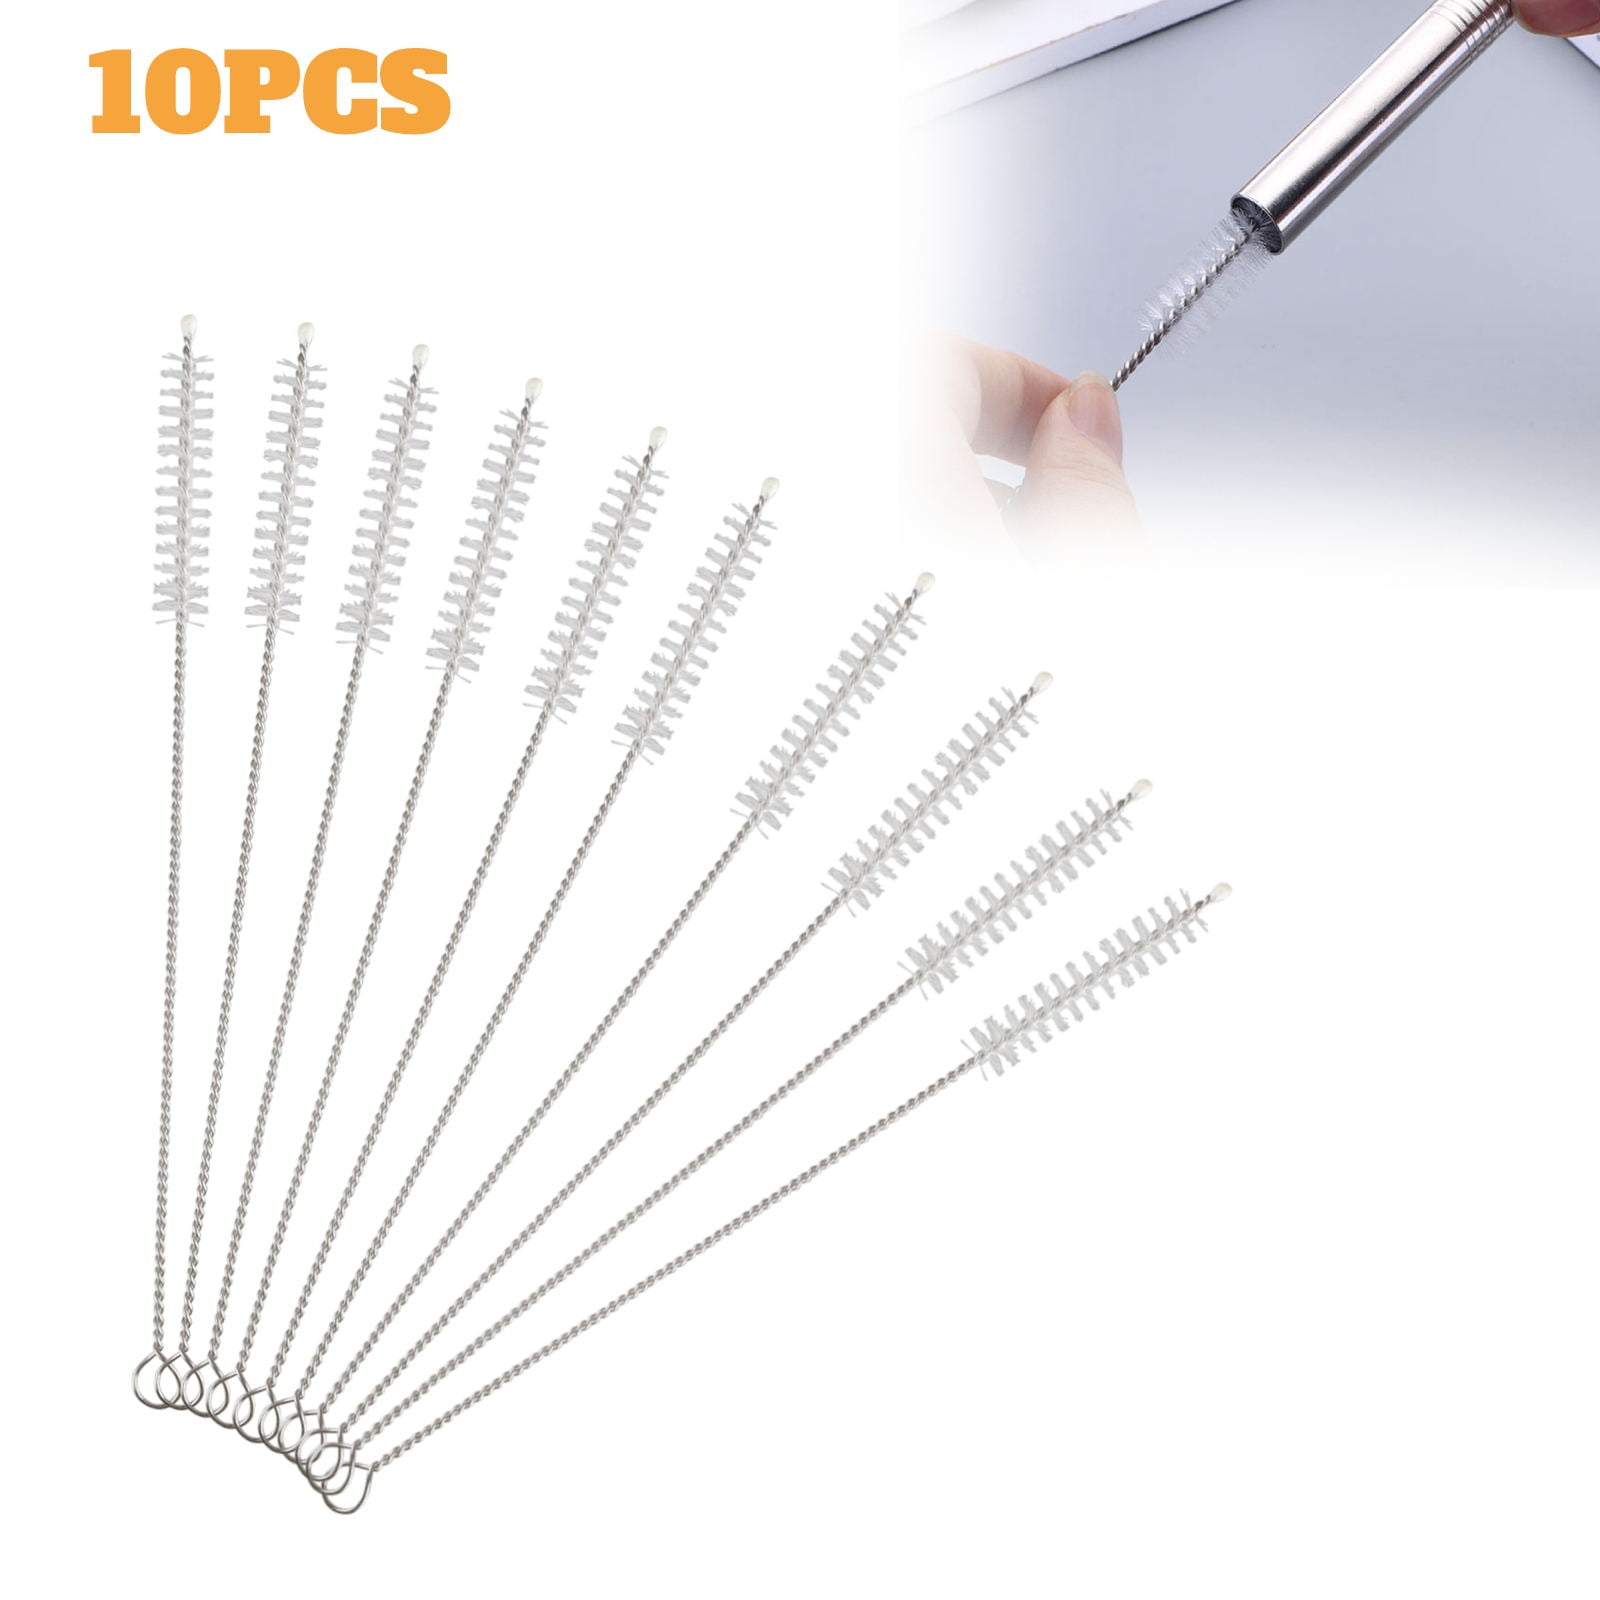 1set 10pcs Pipe Cleaner Brush Set For Cleaning Pipes And Smoking